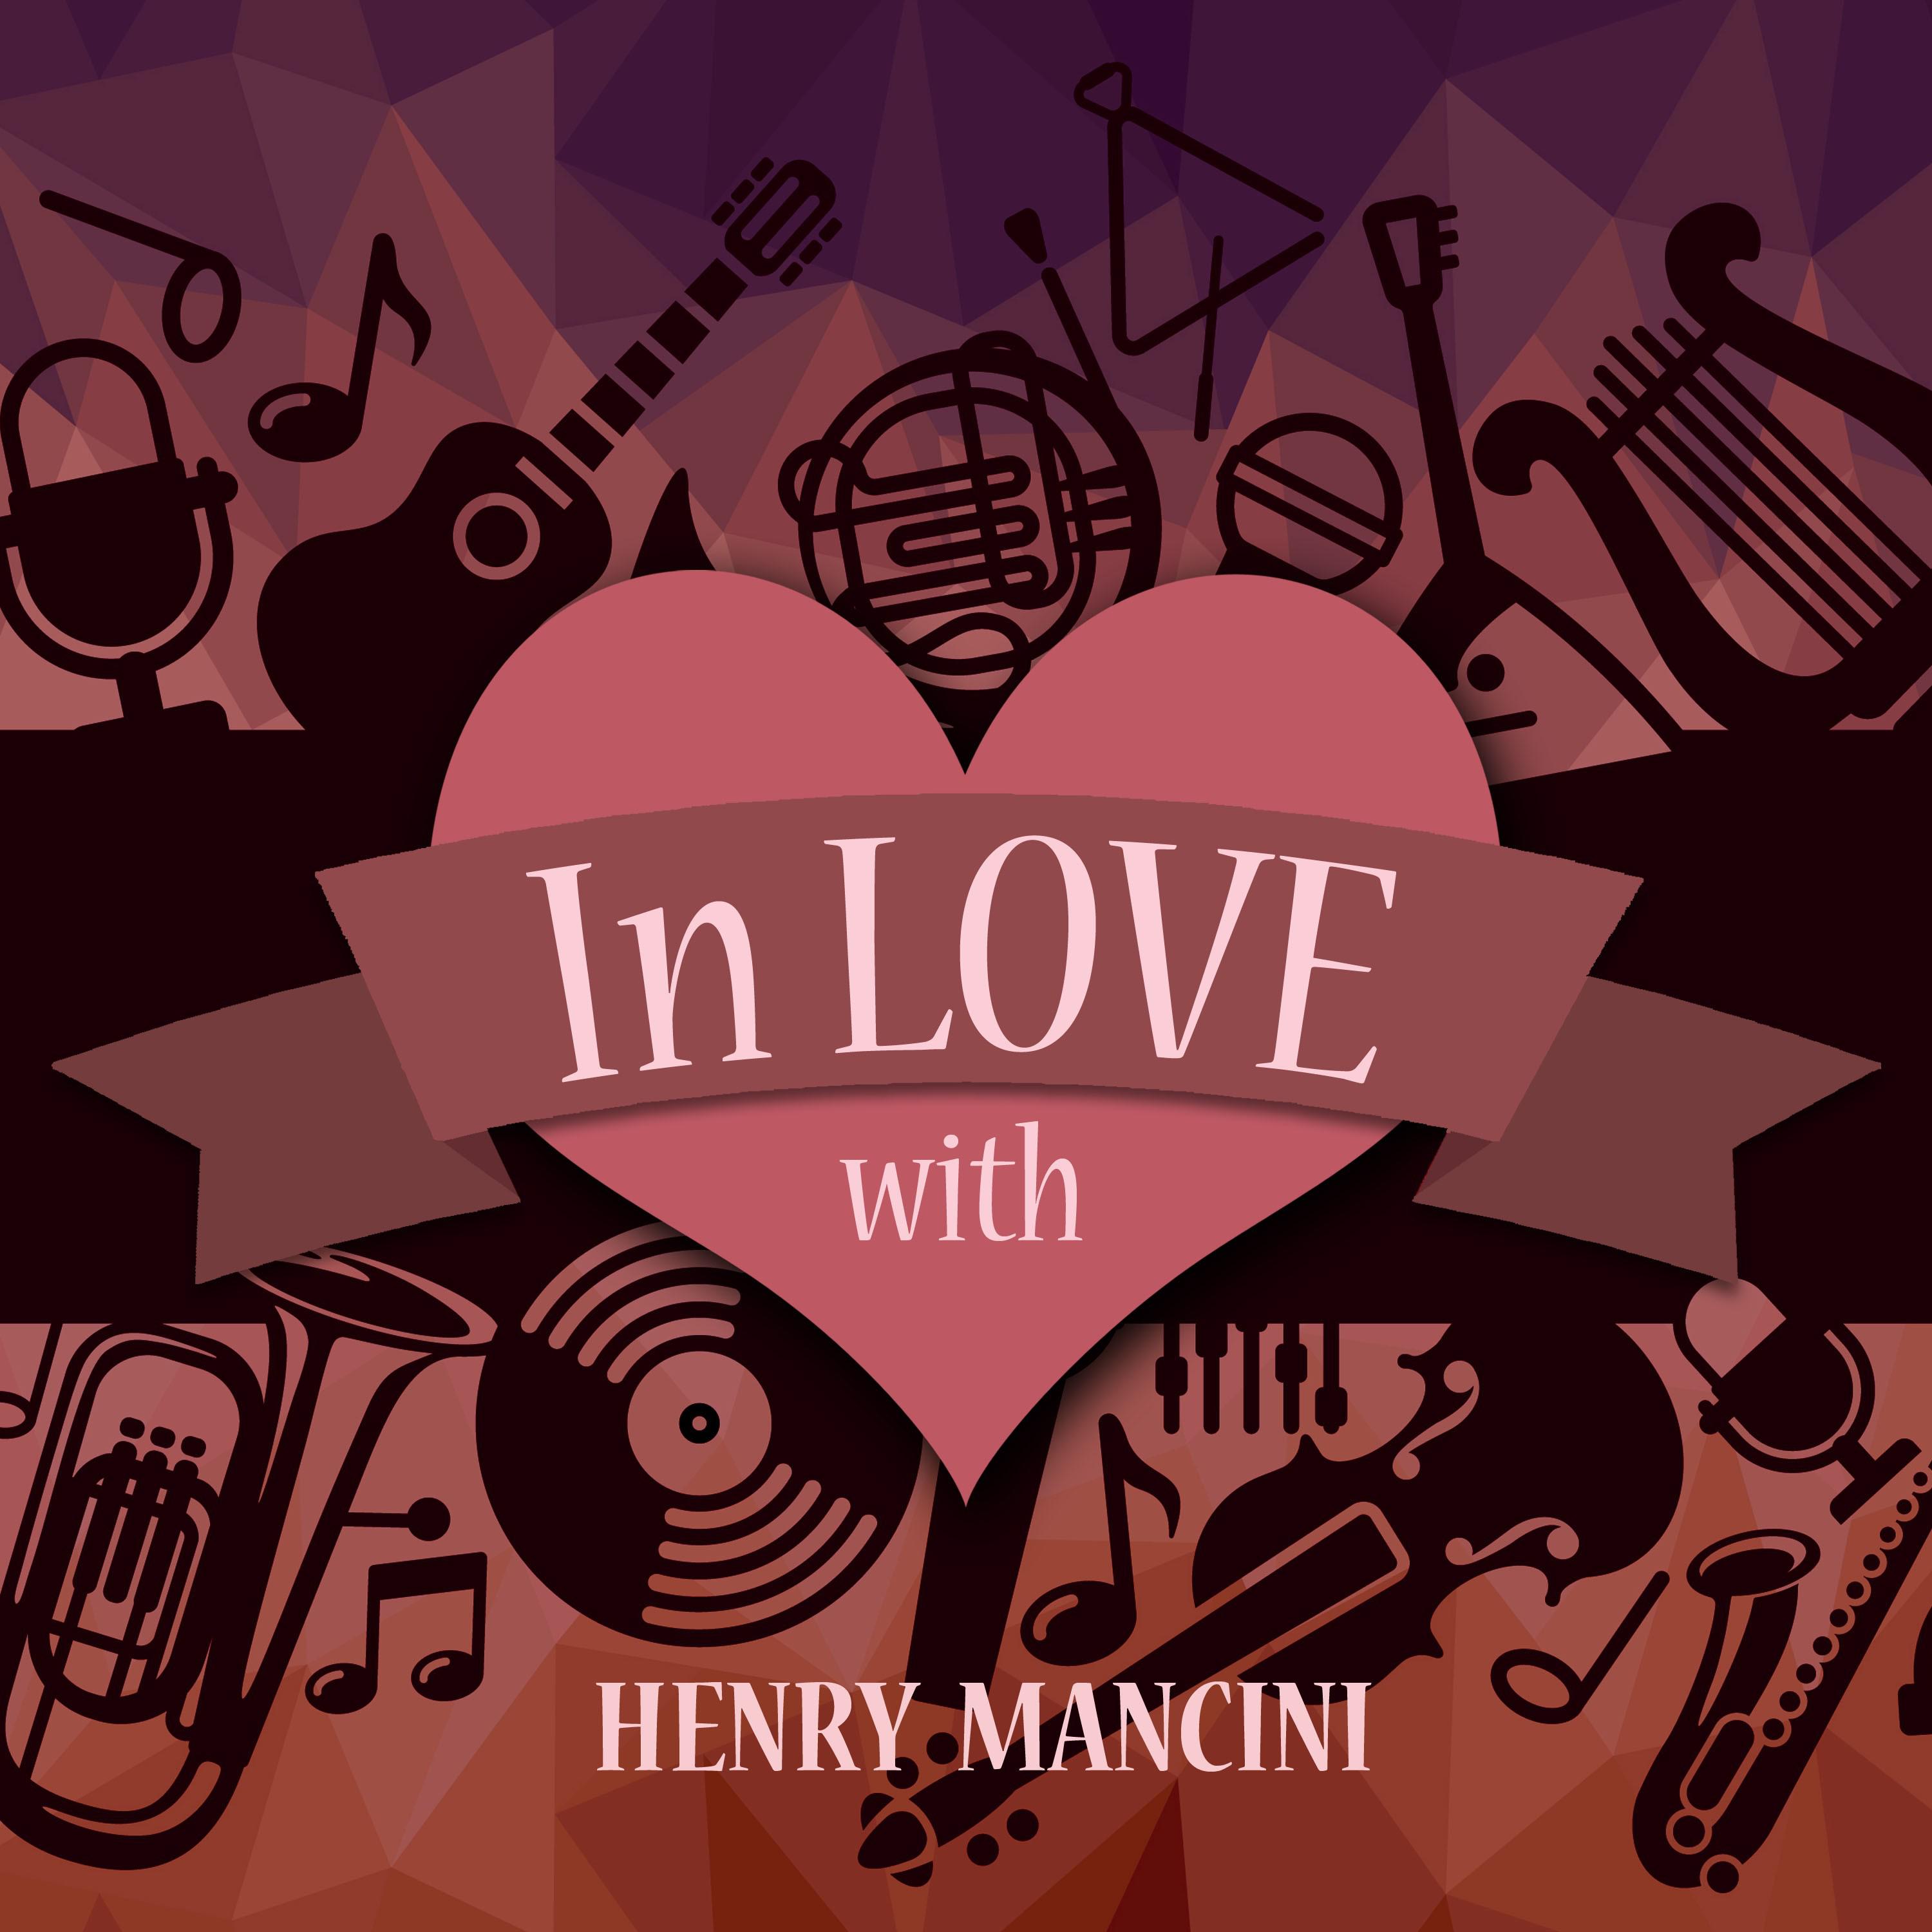 In Love with Henry Mancini